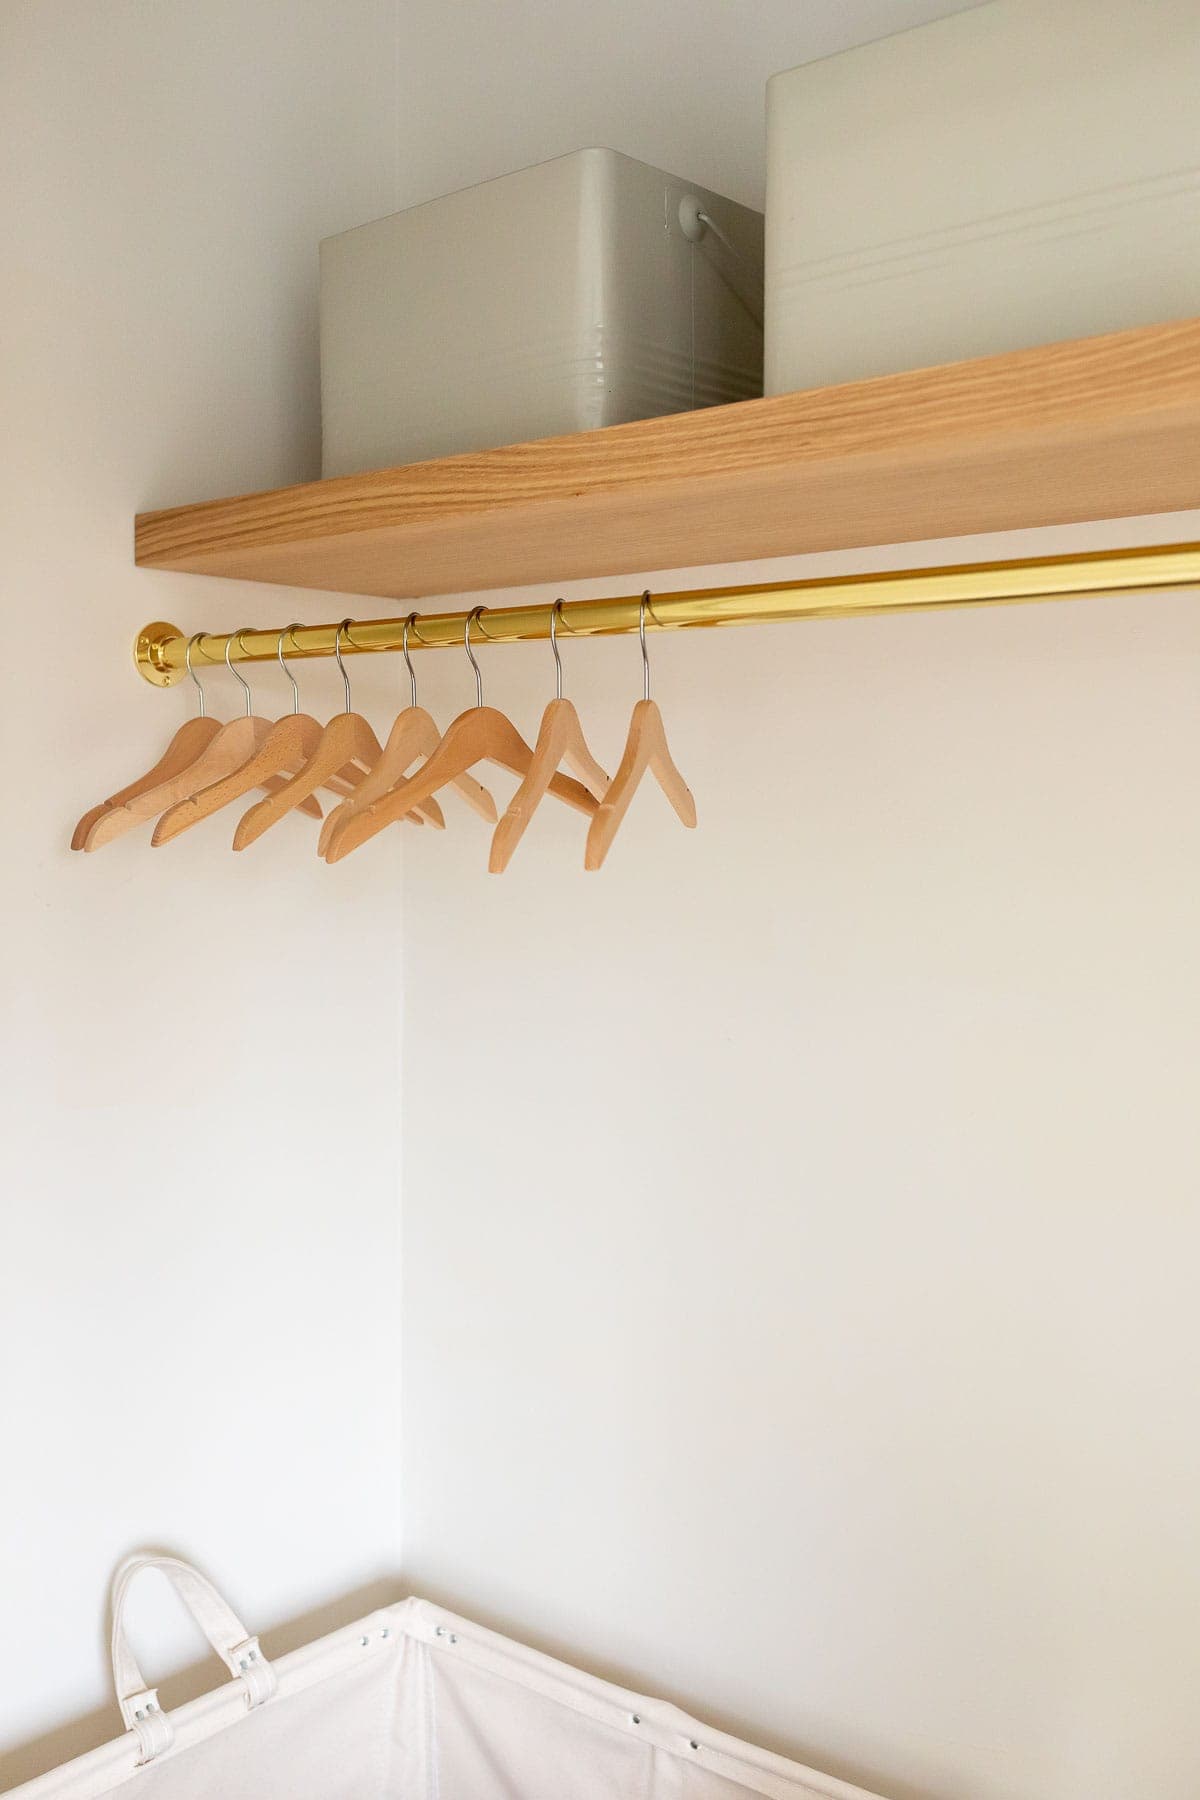 Cleaning trolley on a floating wooden shelf with a brass clothes rail below